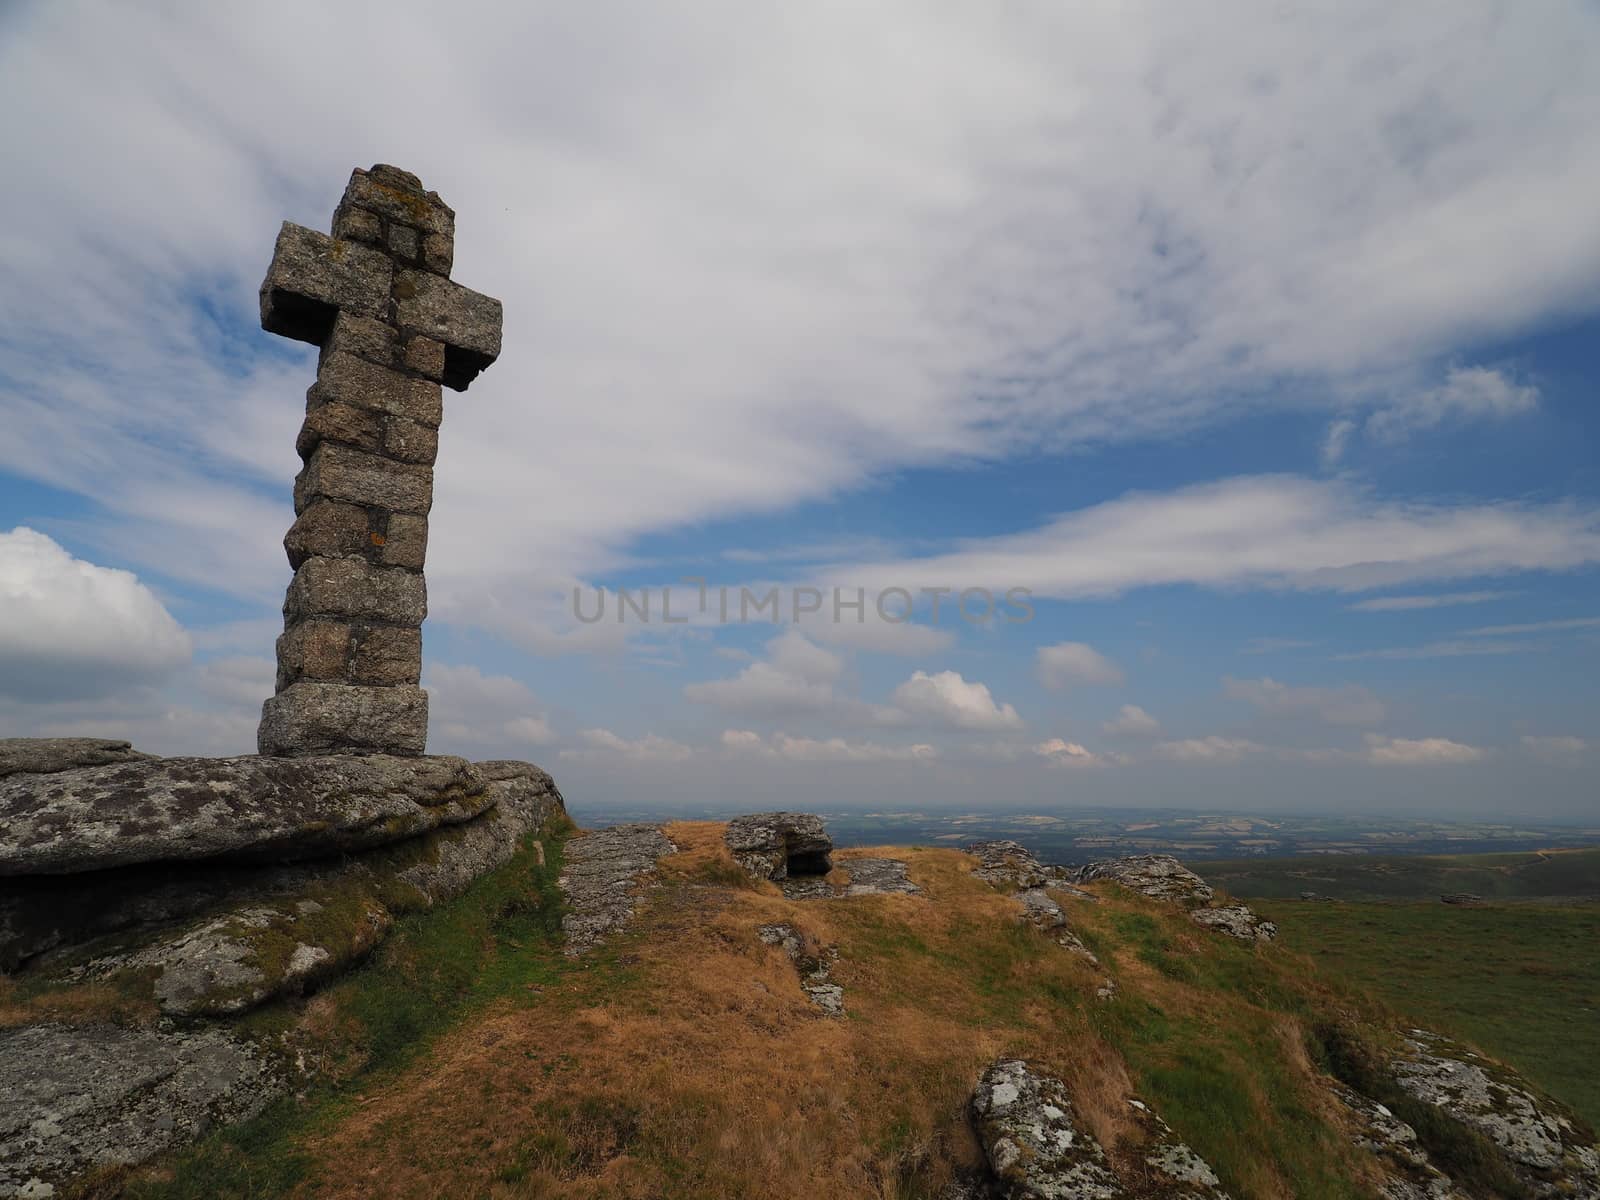 View from Brat Tor and Widgery Cross with white clouds in a blue sky, Dartmoor National Park, Devon, UK